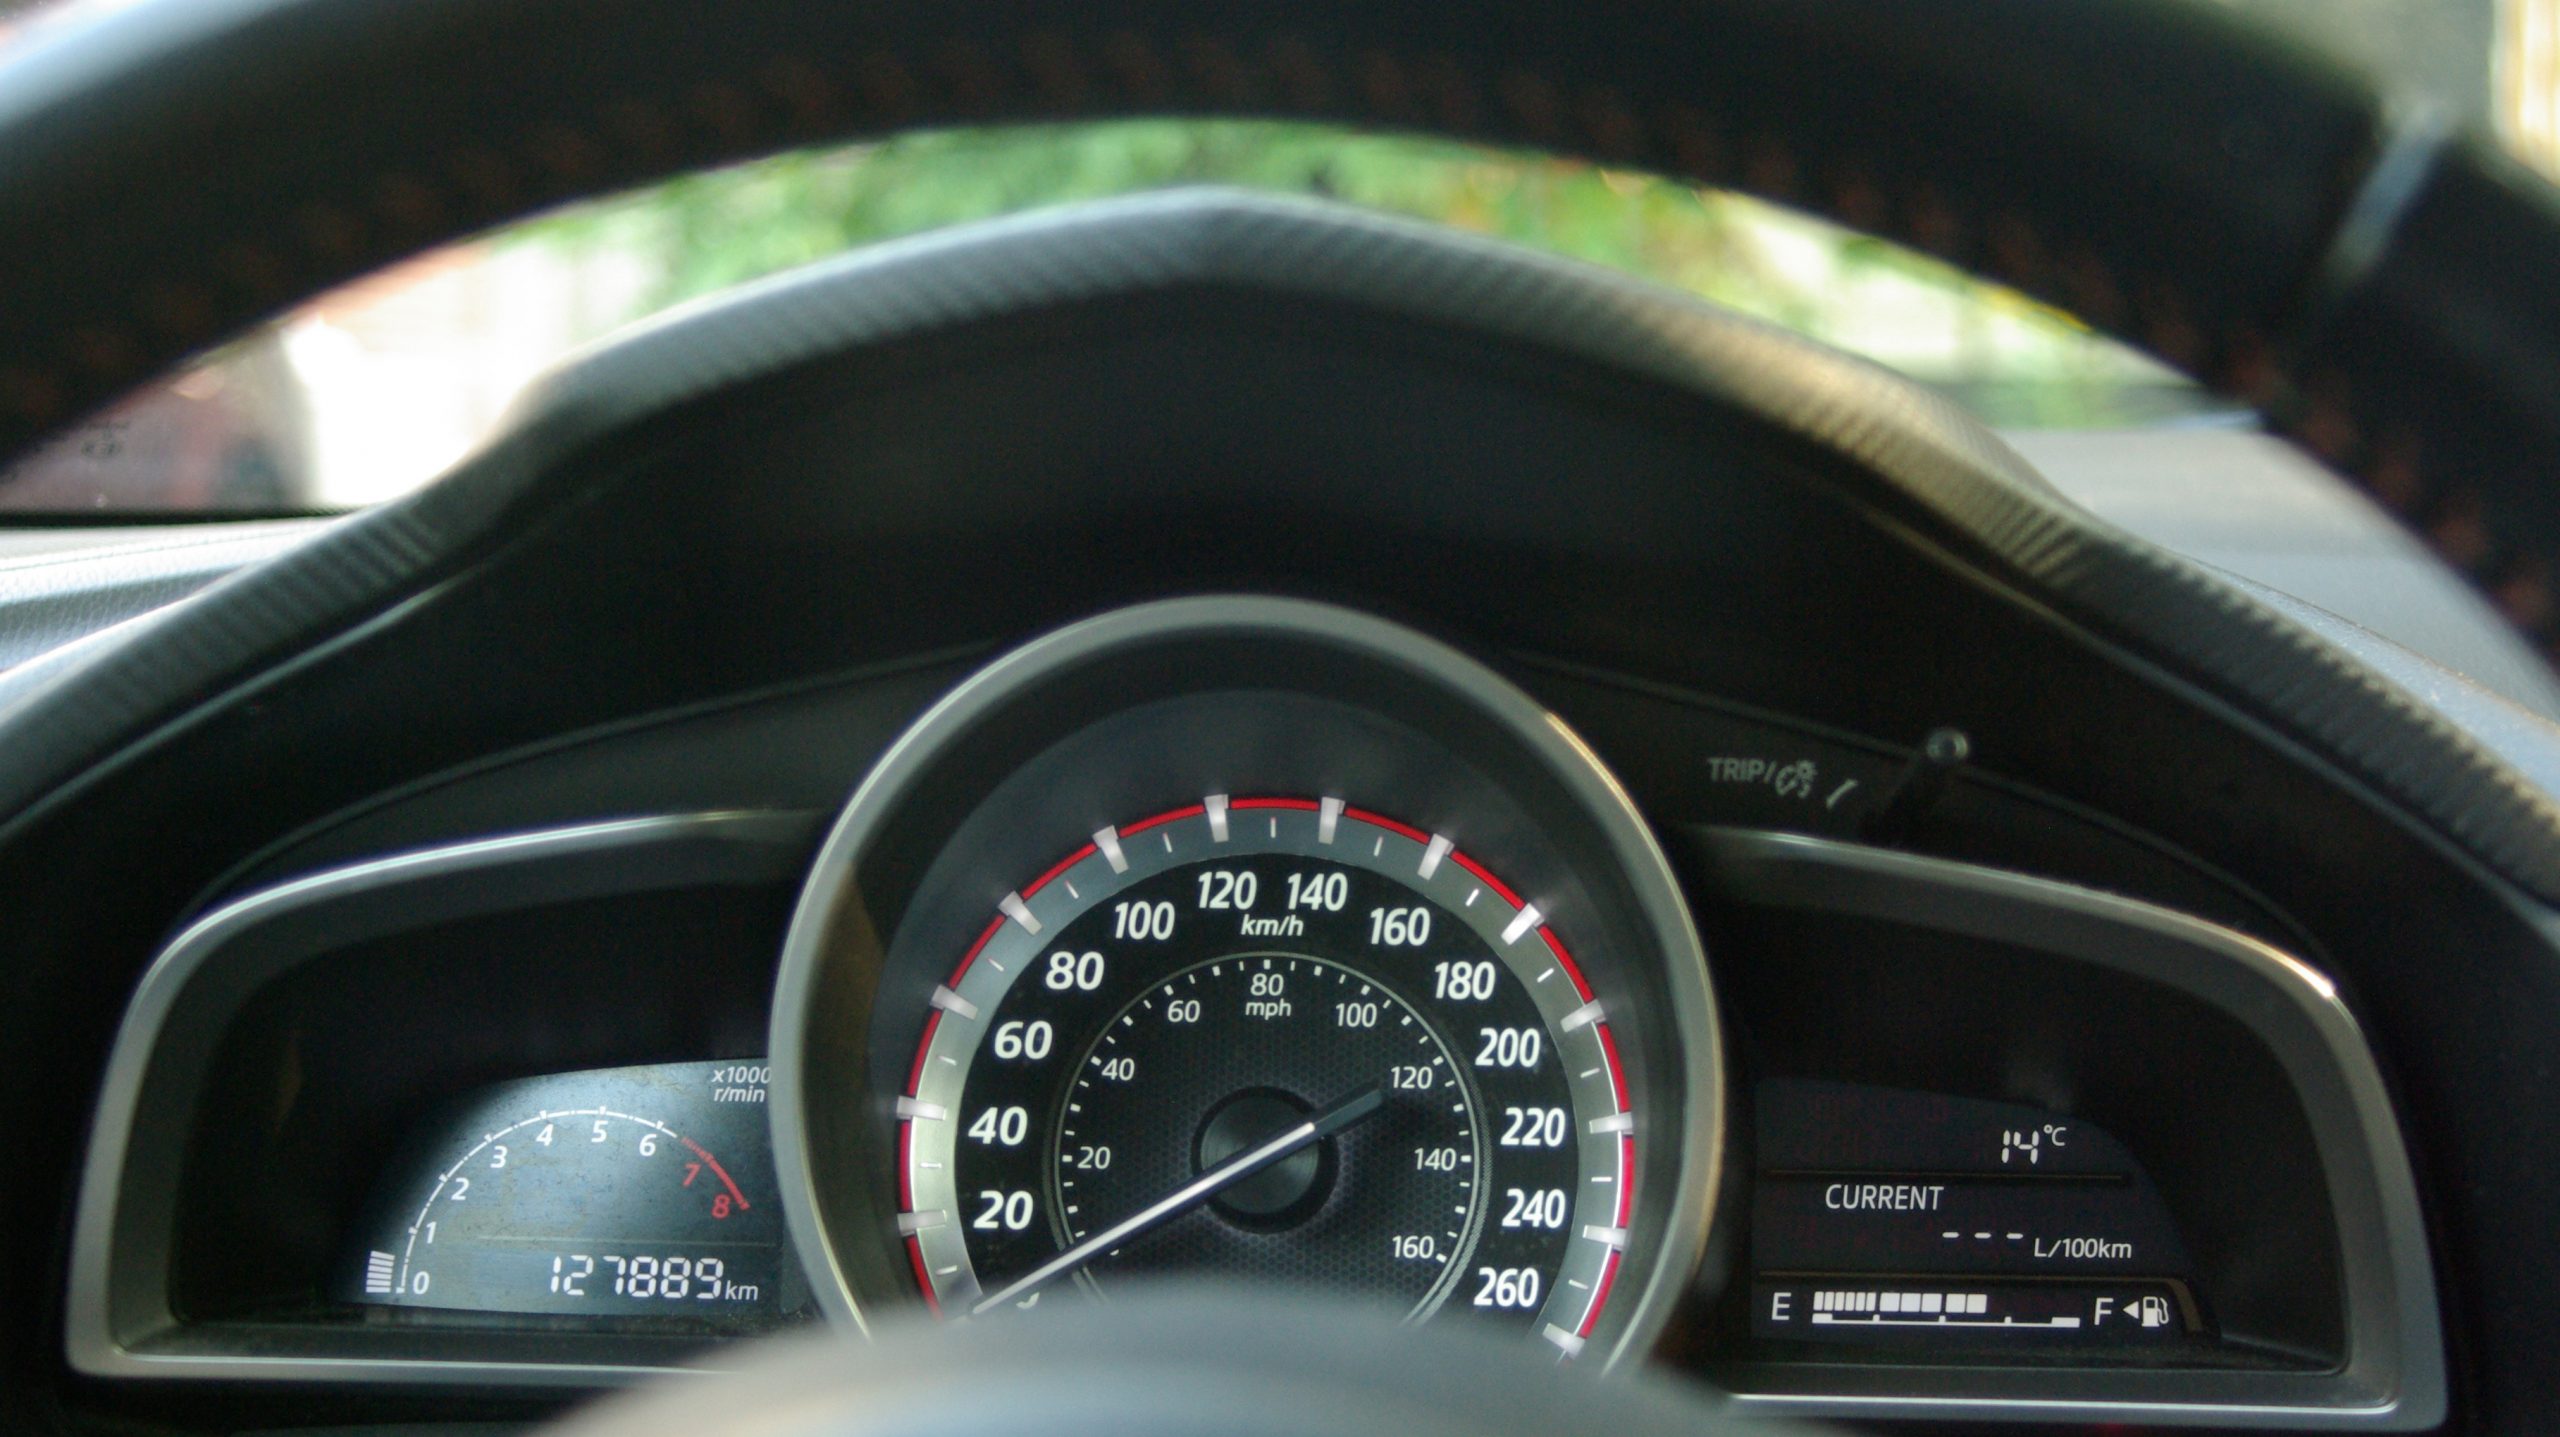 Car dashboard showing speedometer in both kilometers and miles.